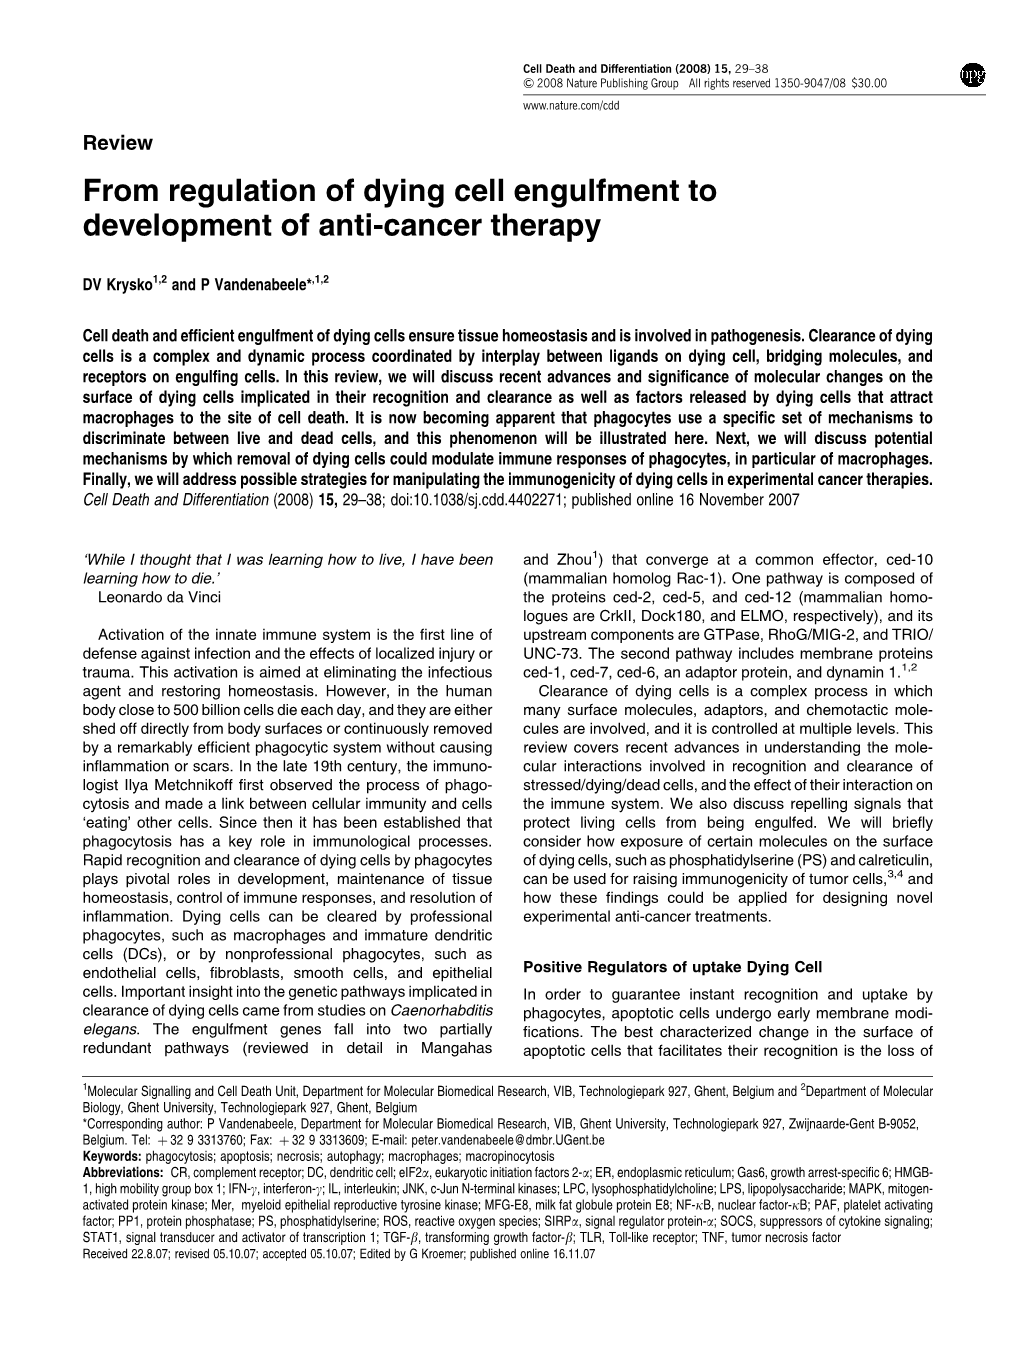 From Regulation of Dying Cell Engulfment to Development of Anti-Cancer Therapy